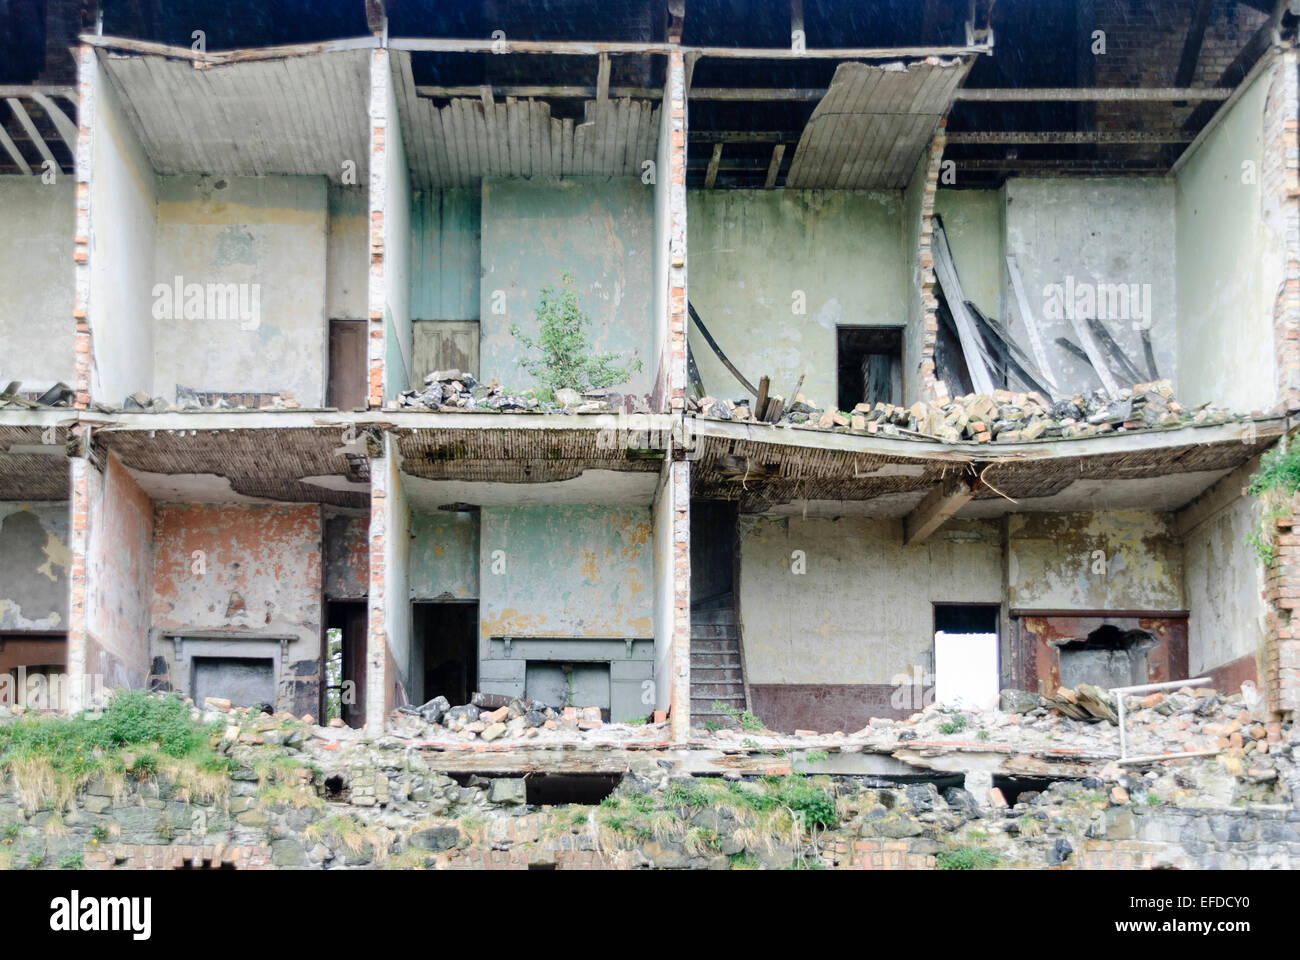 Front wall of a building collapses and falls away, exposing the rooms of flats/a[artments behind. Stock Photo